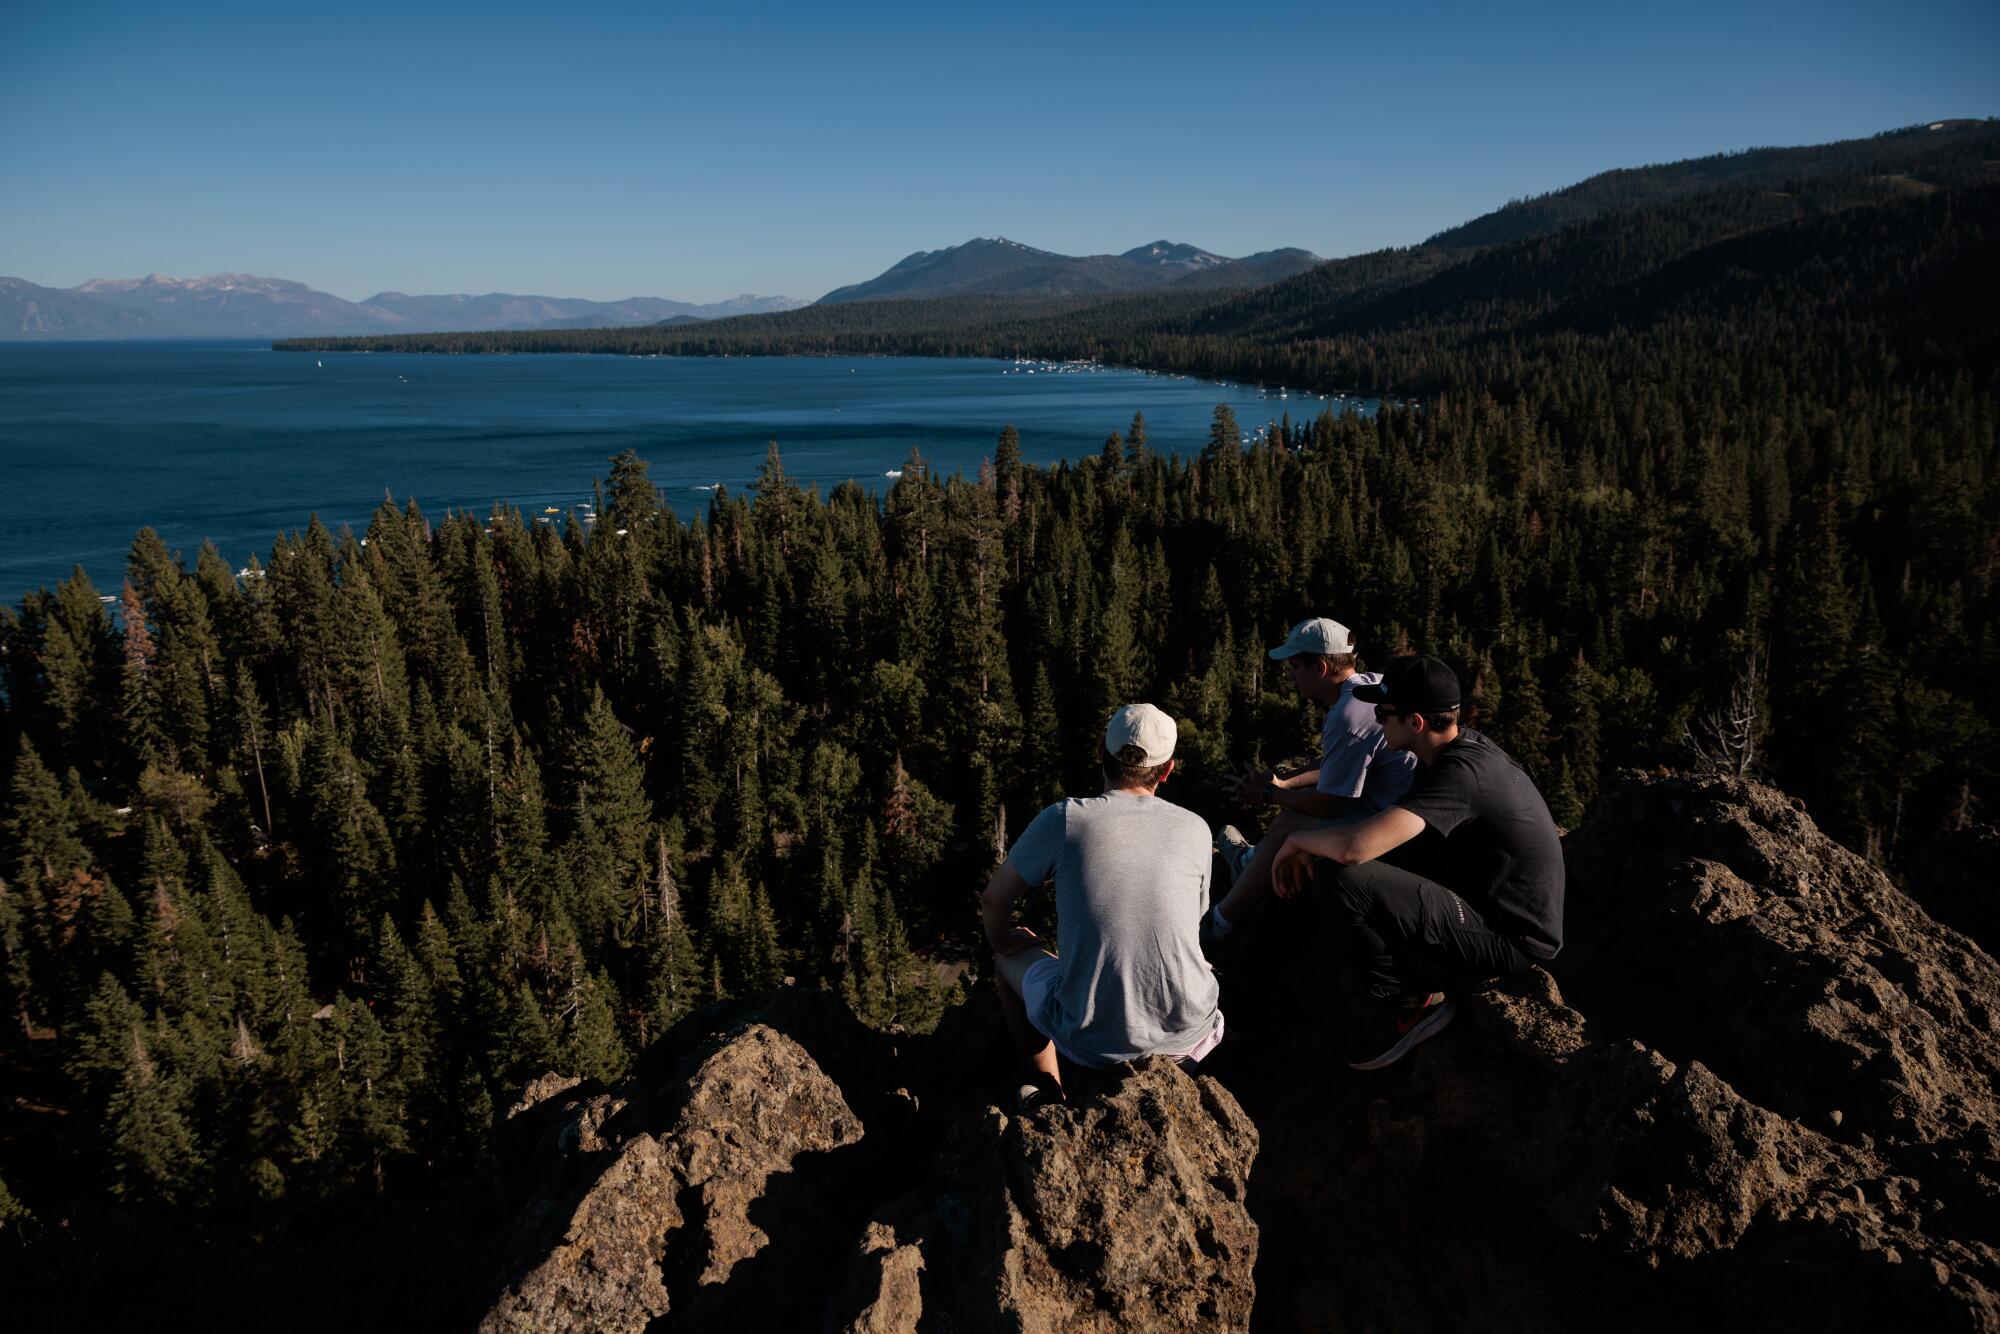 Three people perch on a rock and gaze out over conifers toward an alpine lake.